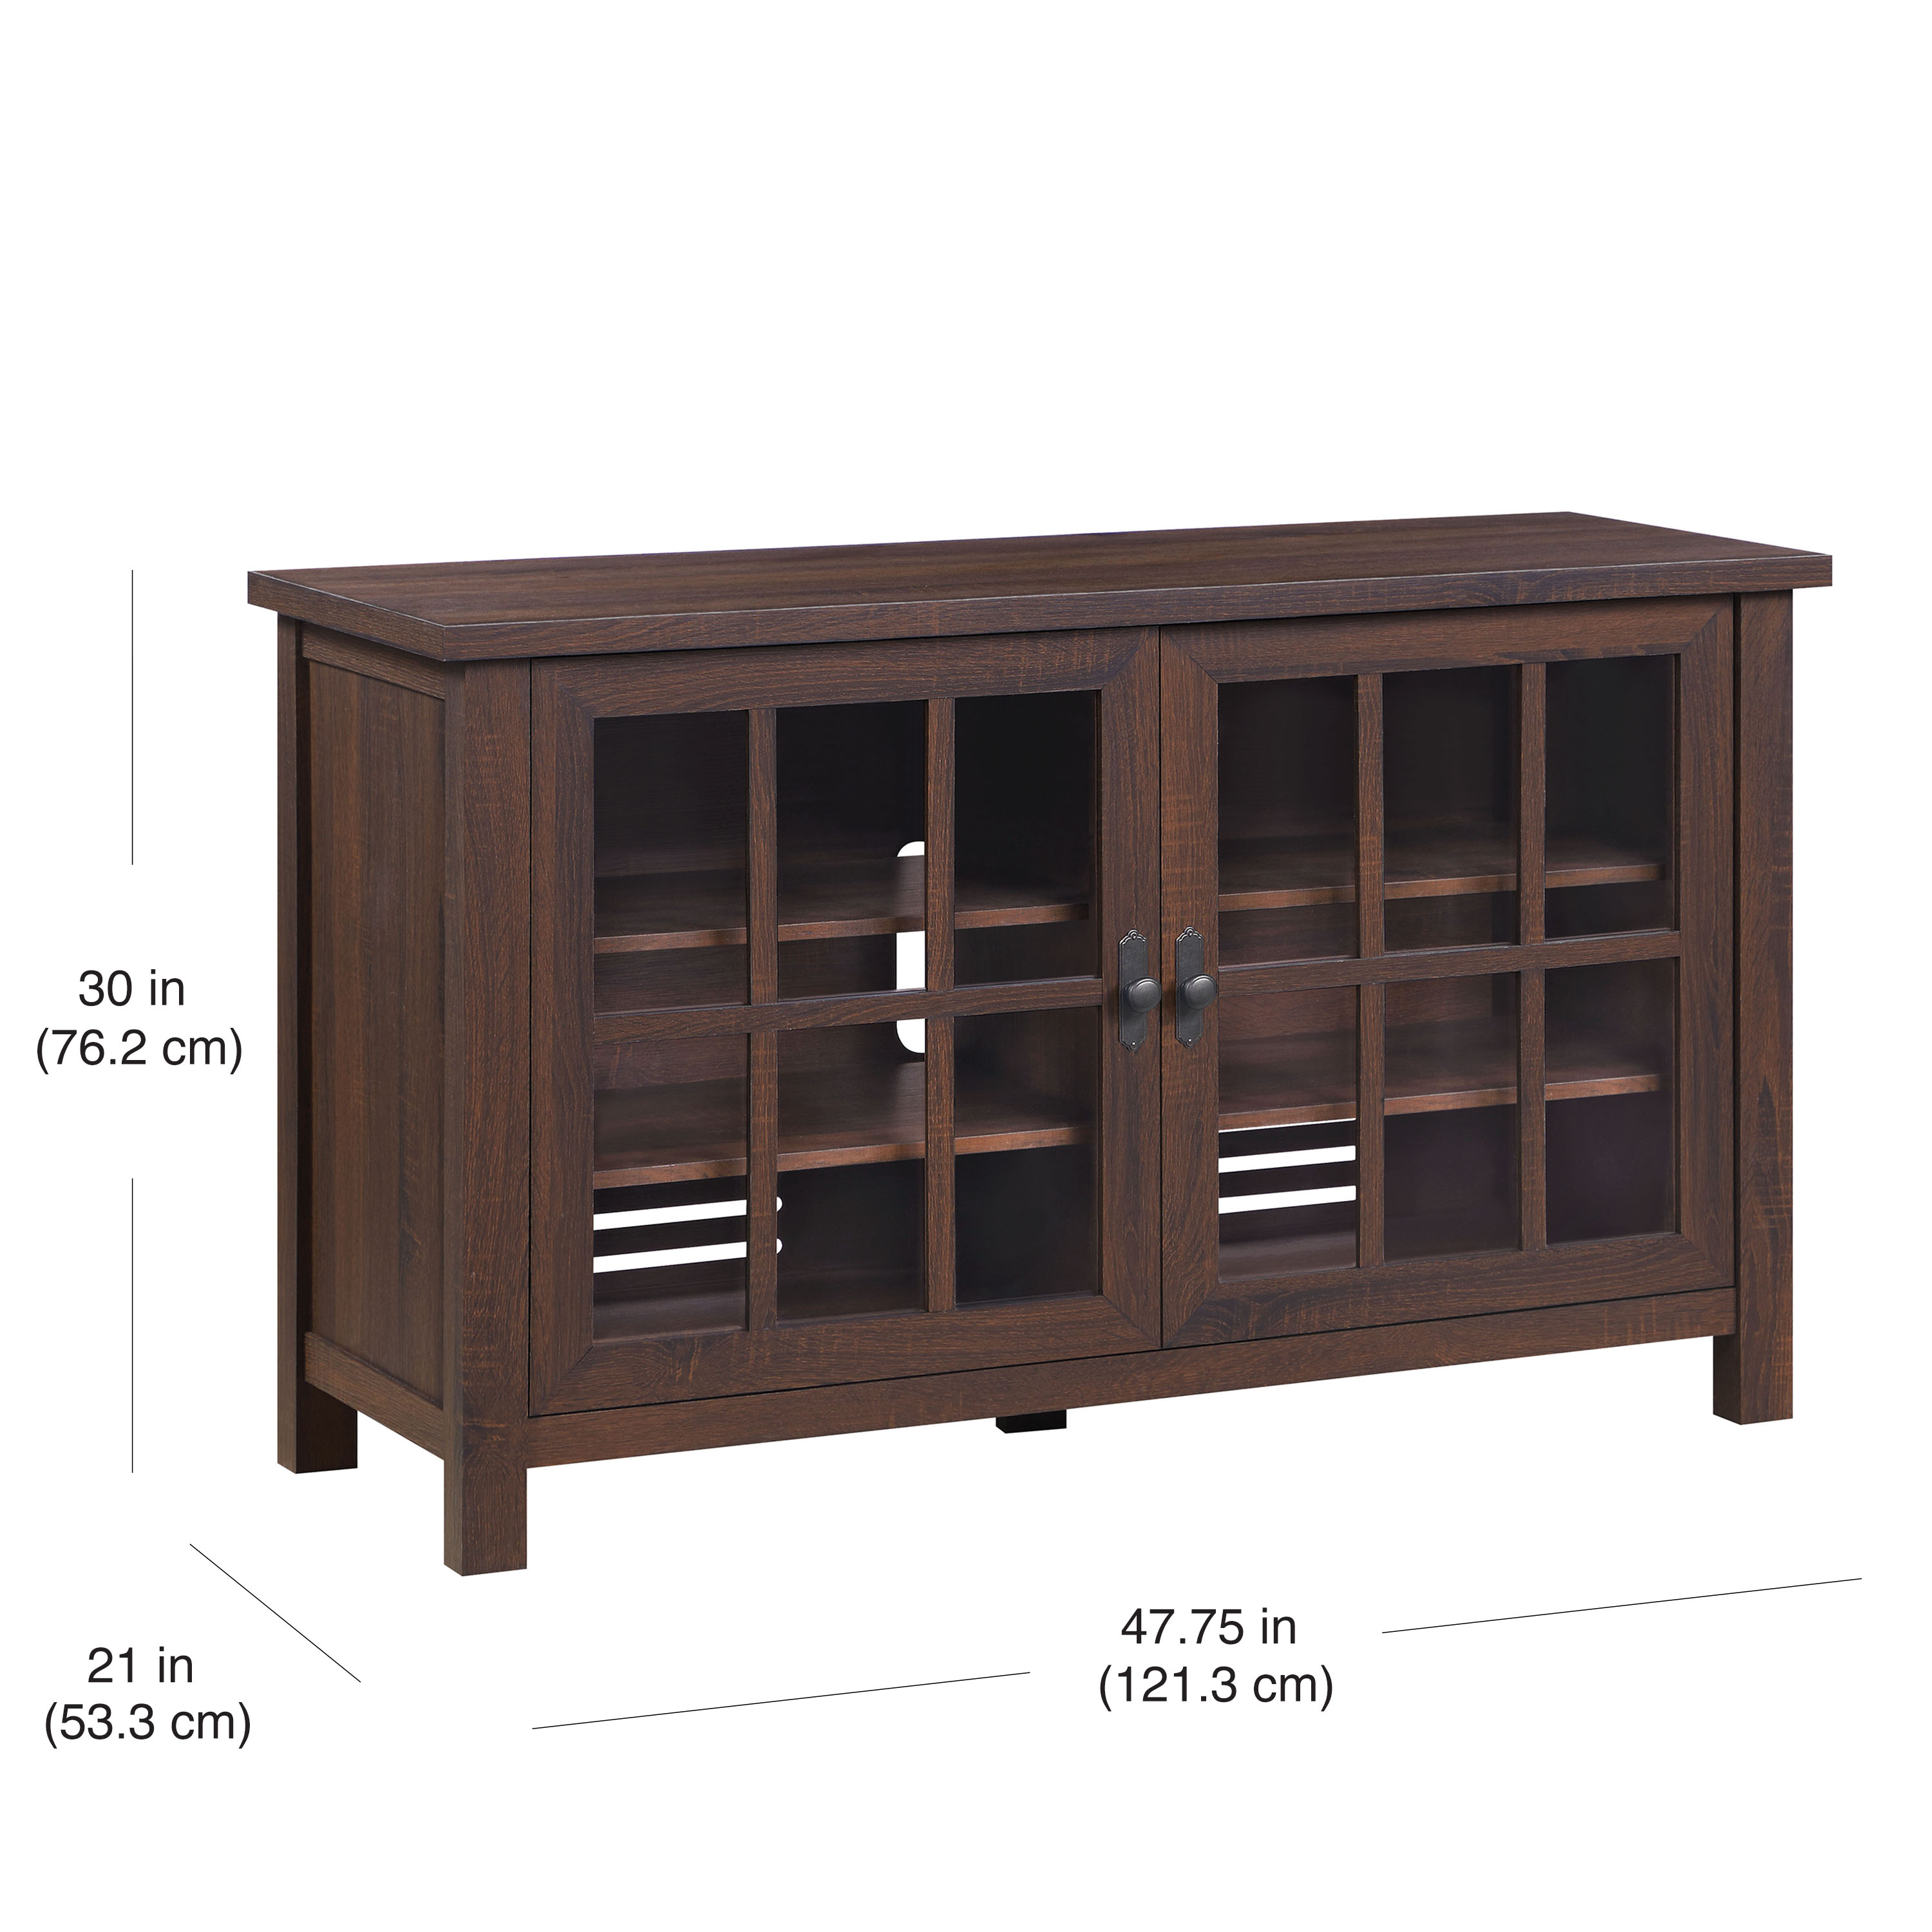 Better Homes & Gardens Oxford Square TV Stand for TVs up to 55", Dark Brown - image 2 of 12